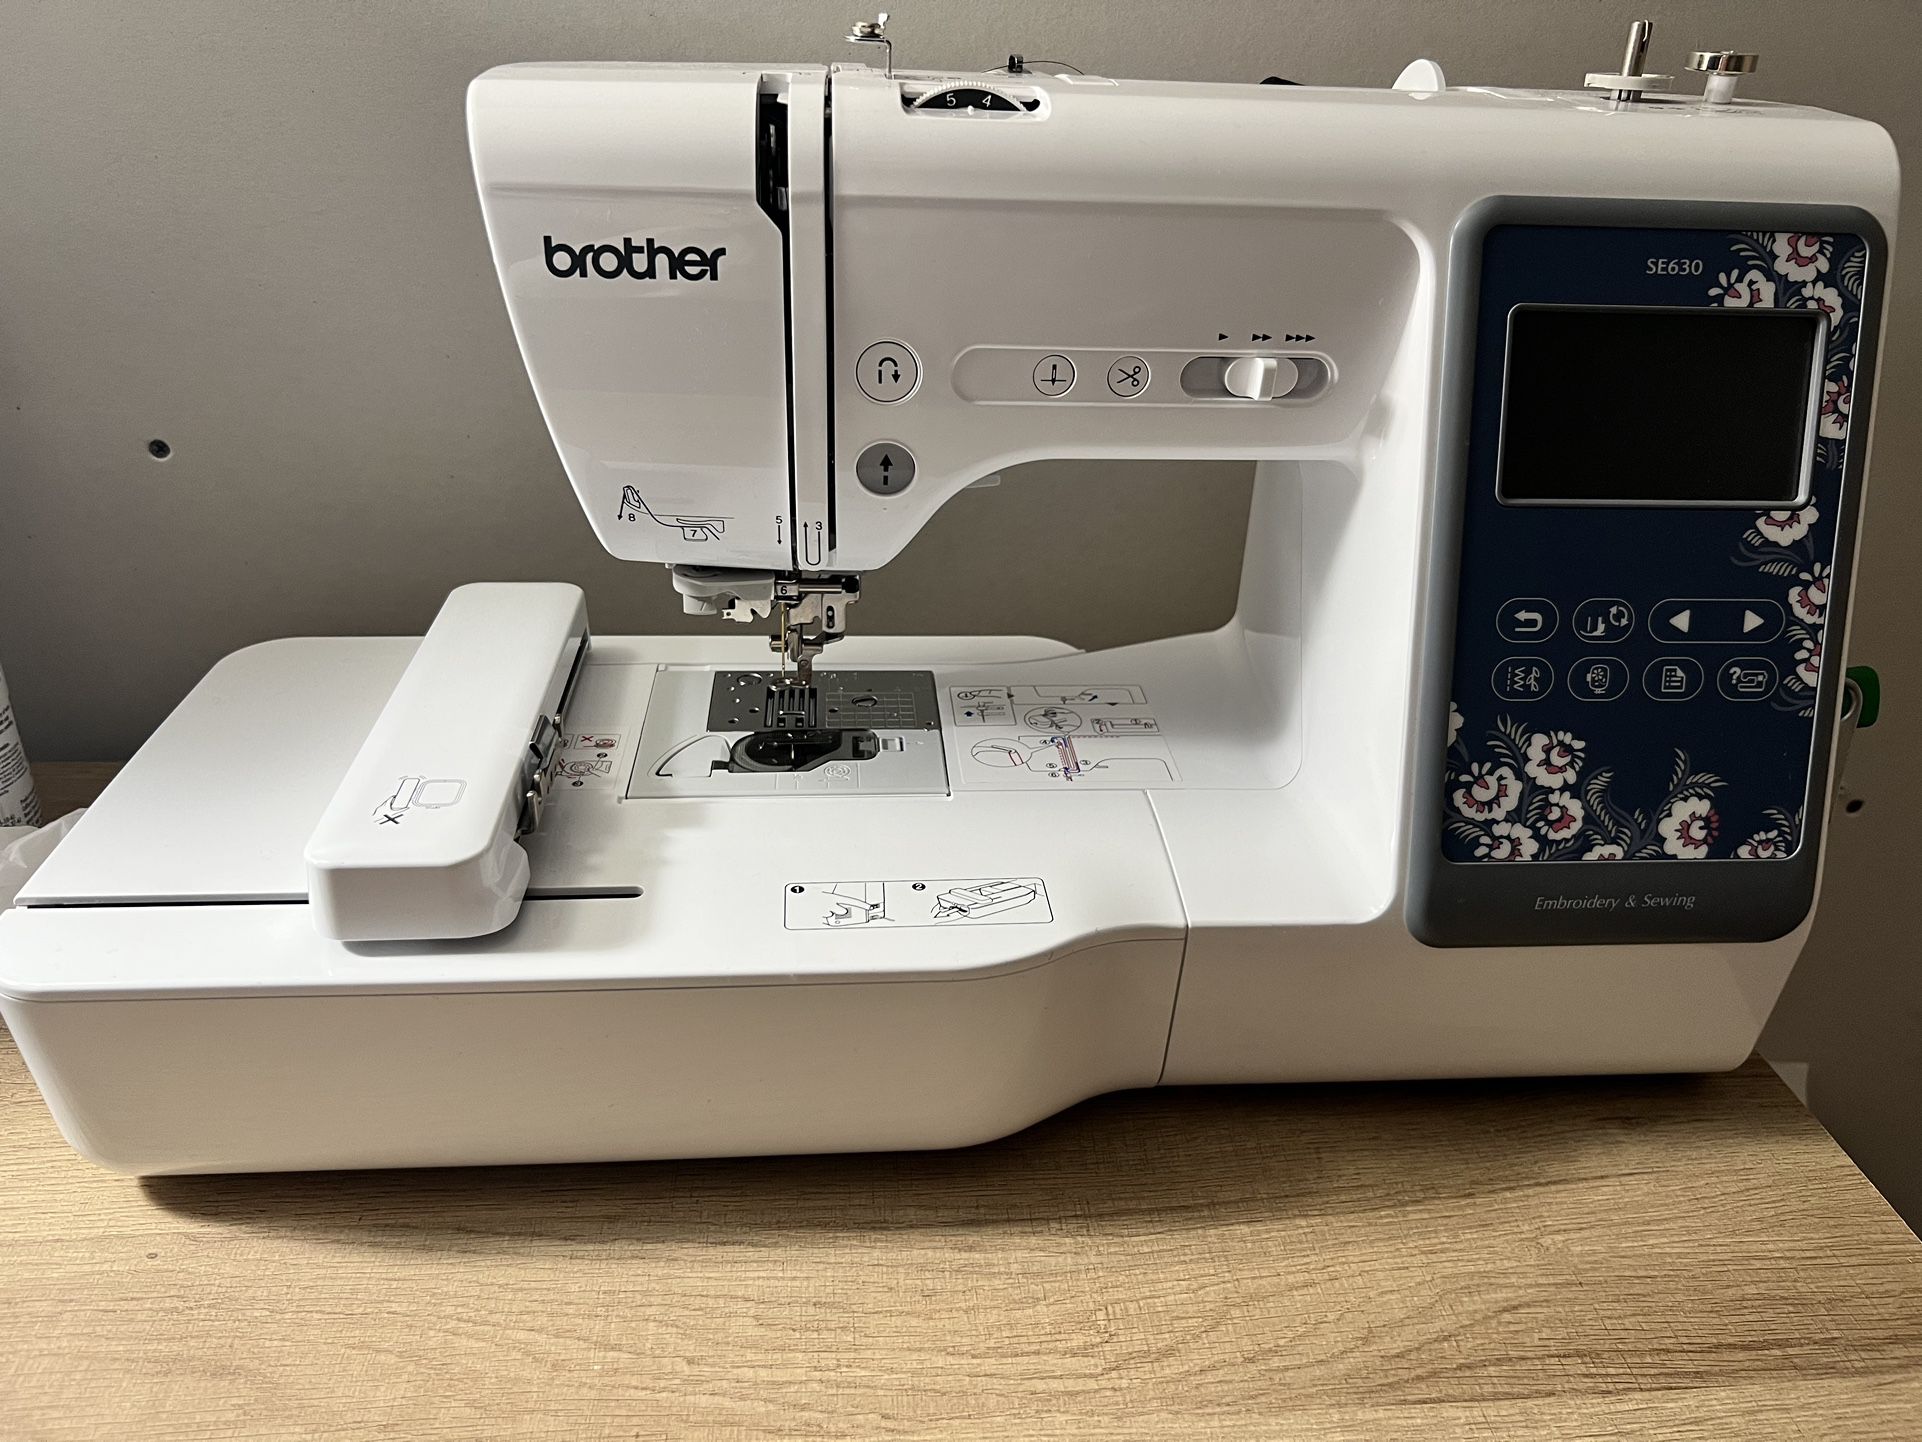 Brother SE630 Embroidery And Sewing Machine for Sale in Suffield